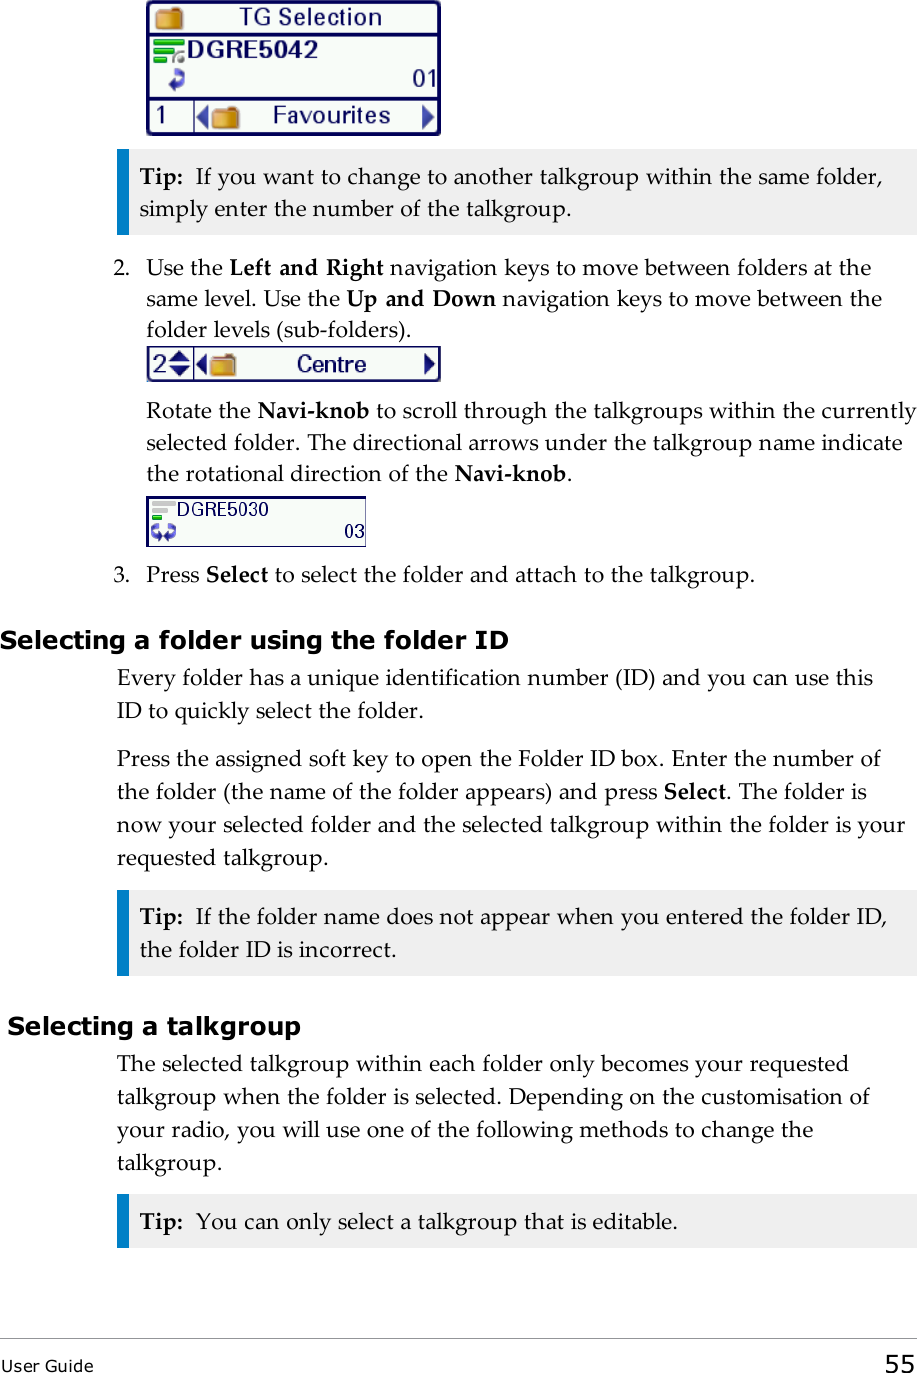 Tip: If you want to change to another talkgroup within the same folder,simply enter the number of the talkgroup.2. Use the Left and Right navigation keys to move between folders at thesame level. Use the Up and Down navigation keys to move between thefolder levels (sub-folders).Rotate the Navi-knob to scroll through the talkgroups within the currentlyselected folder. The directional arrows under the talkgroup name indicatethe rotational direction of the Navi-knob.3. Press Select to select the folder and attach to the talkgroup.Selecting a folder using the folder IDEvery folder has a unique identification number (ID) and you can use thisIDto quickly select the folder.Press the assigned soft key to open the Folder ID box. Enter the number ofthe folder (the name of the folder appears) and press Select. The folder isnow your selected folder and the selected talkgroup within the folder is yourrequested talkgroup.Tip: If the folder name does not appear when you entered the folder ID,the folder ID is incorrect.Selecting a talkgroupThe selected talkgroup within each folder only becomes your requestedtalkgroup when the folder is selected. Depending on the customisation ofyour radio, you will use one of the following methods to change thetalkgroup.Tip: You can only select a talkgroup that is editable.User Guide 55